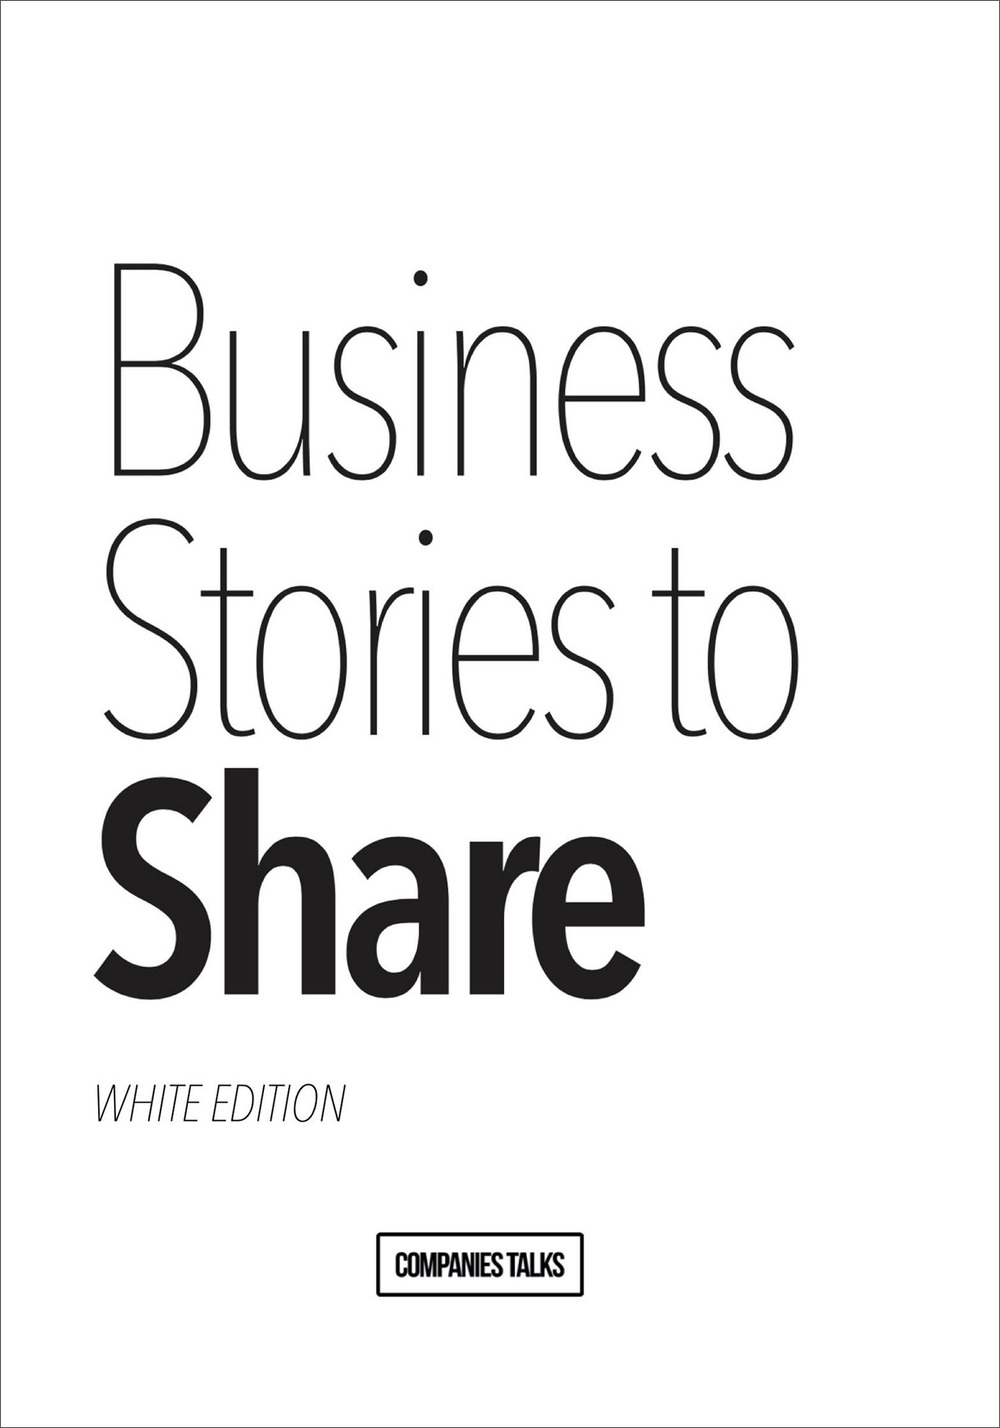 Business stories to share. White edition